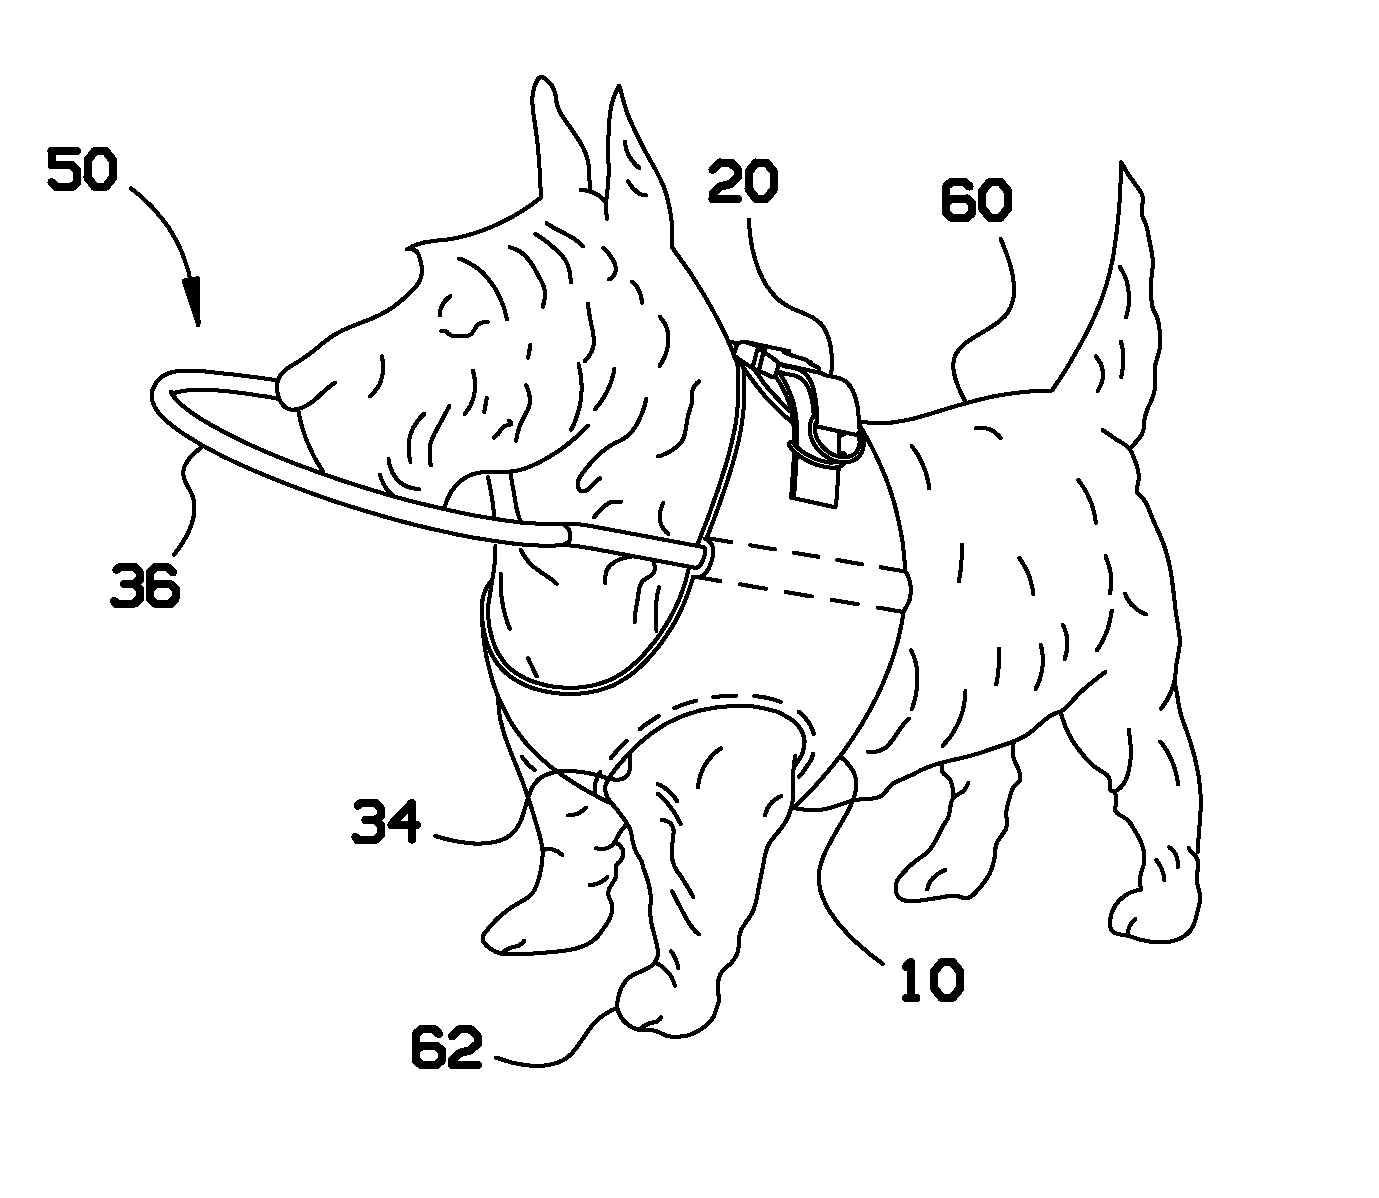 Dog vest with integrated flexible bumper